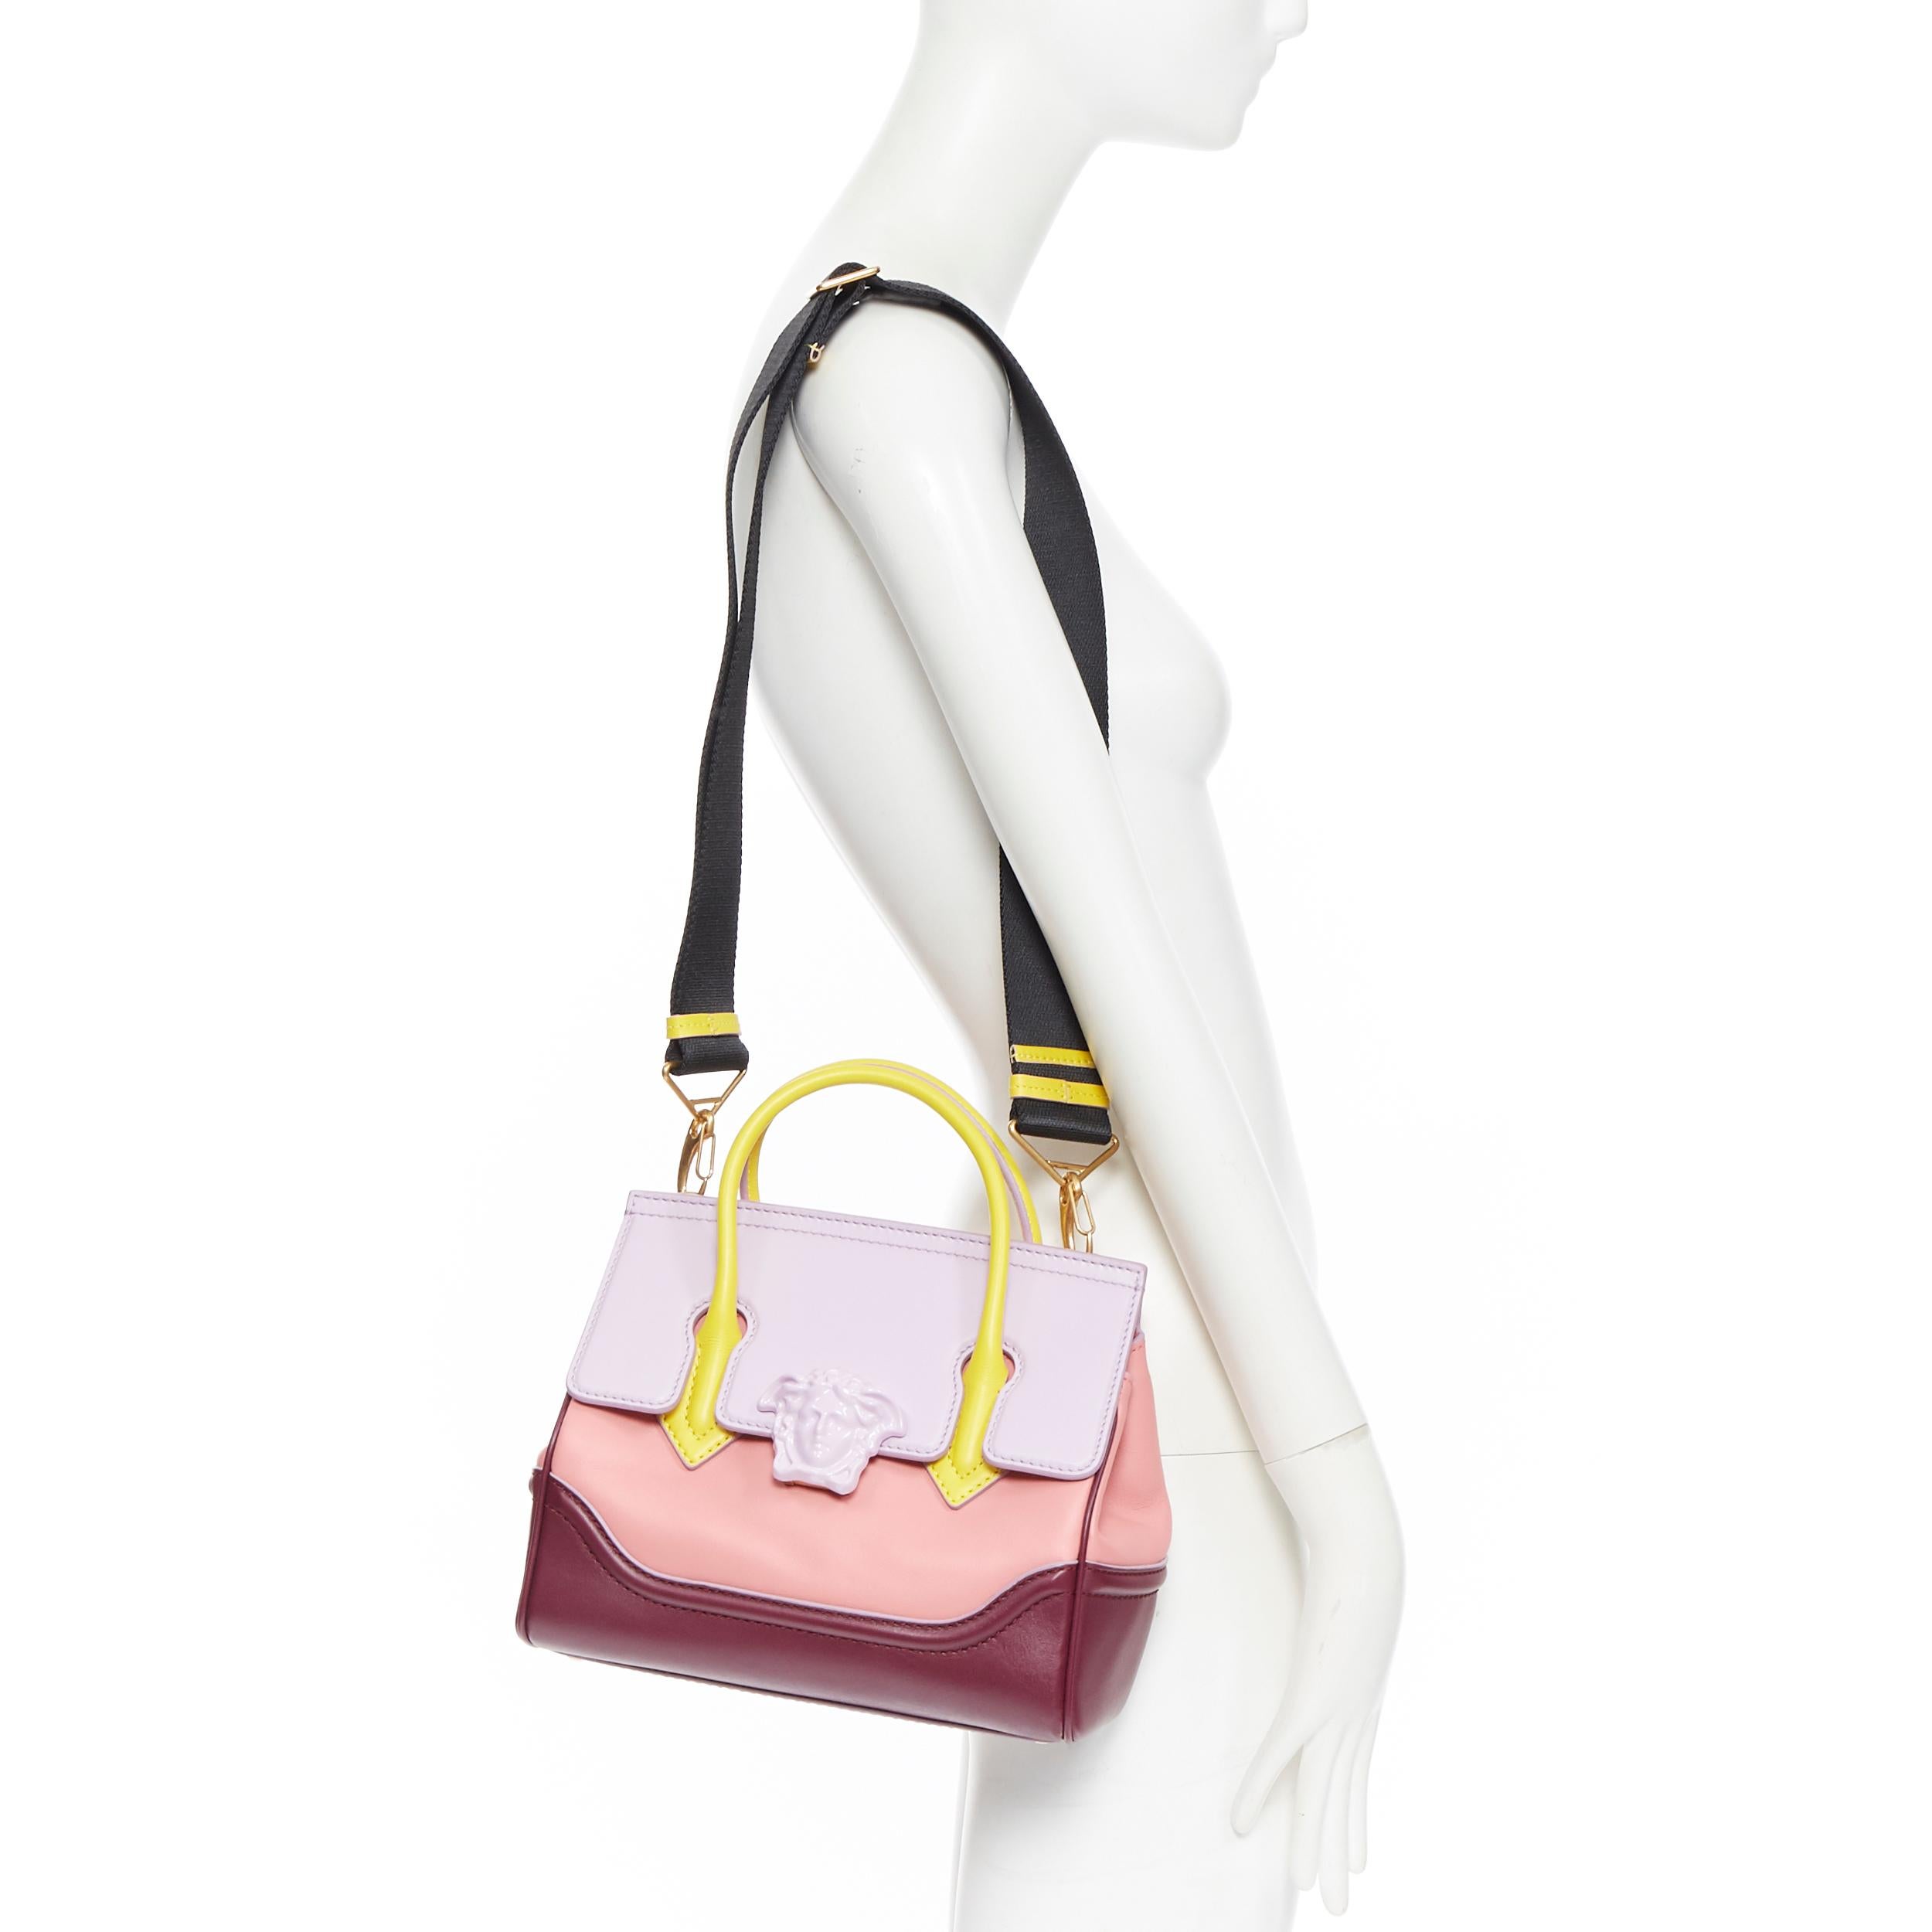 new VERSACE Palazzo Empire Medusa Small pink lilac tri-color flap shoulder bag
Brand: Versace
Designer: Donatella Versace
Collection: Fall Winter 2019
Model Name / Style: Empire 
Material: Leather; calf 
Color: Pink
Pattern: Solid
Closure: